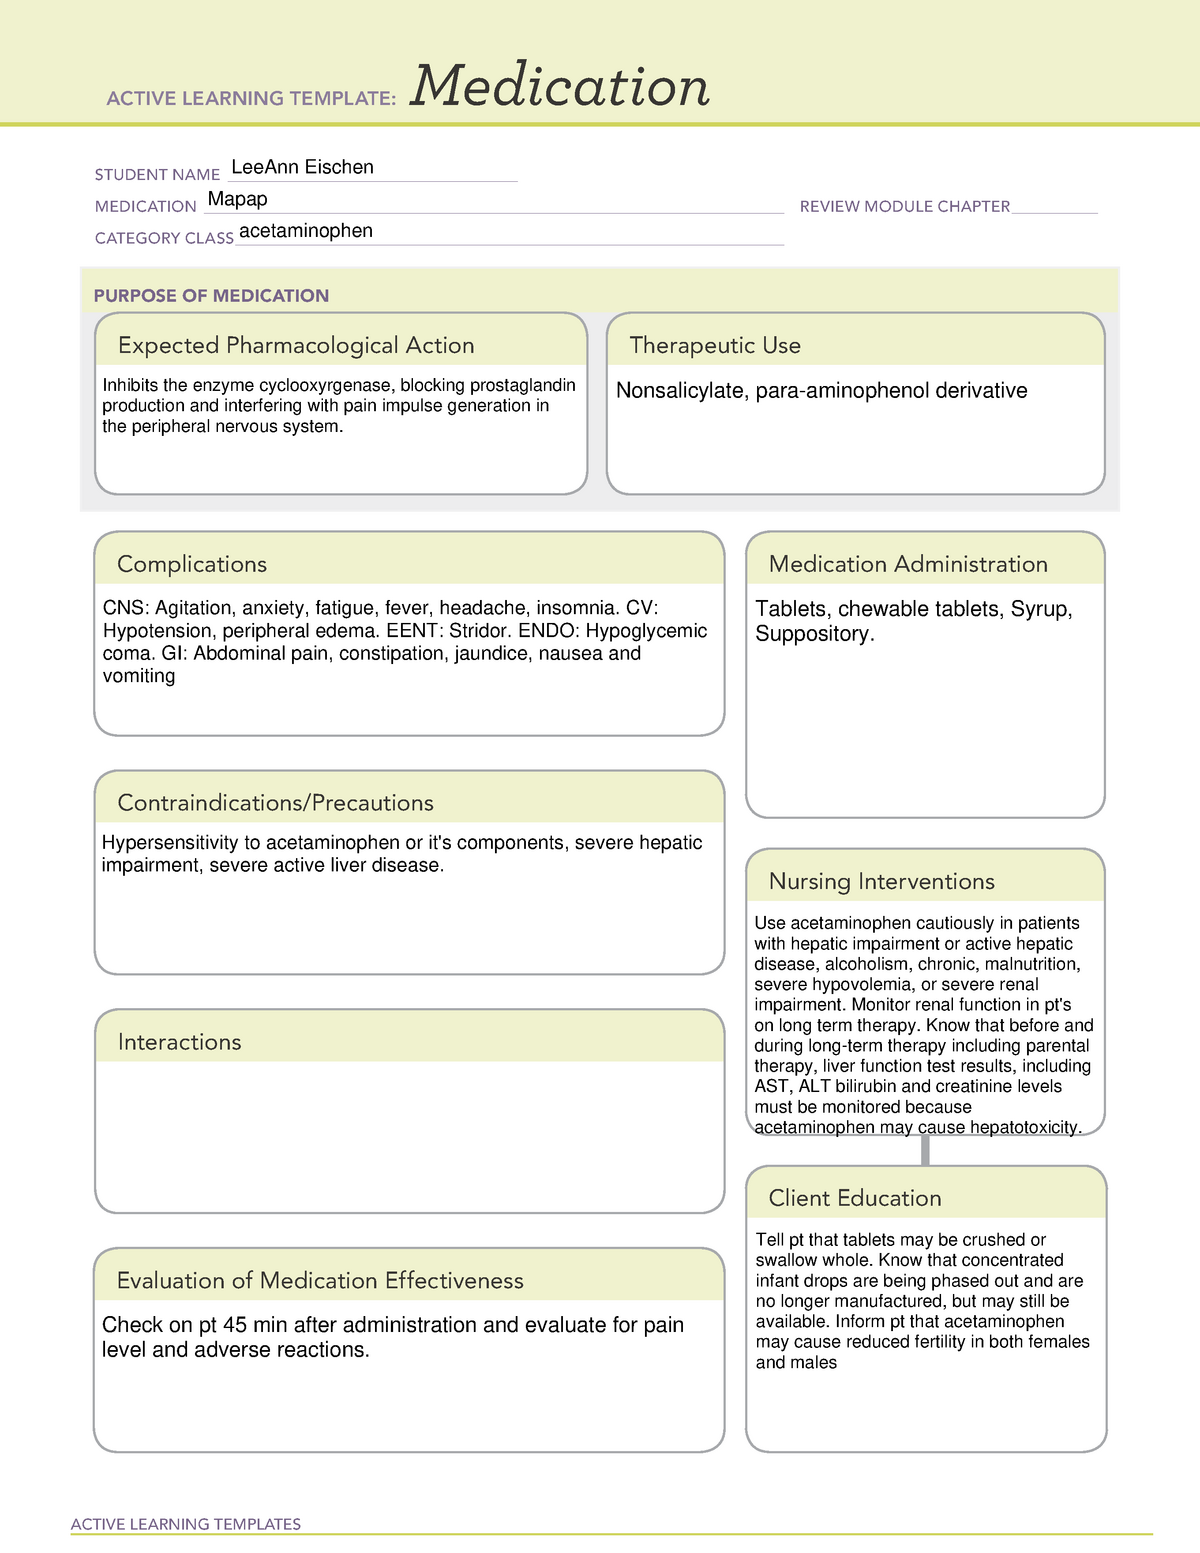 Acetaminophen Medication Template ACTIVE LEARNING TEMPLATES